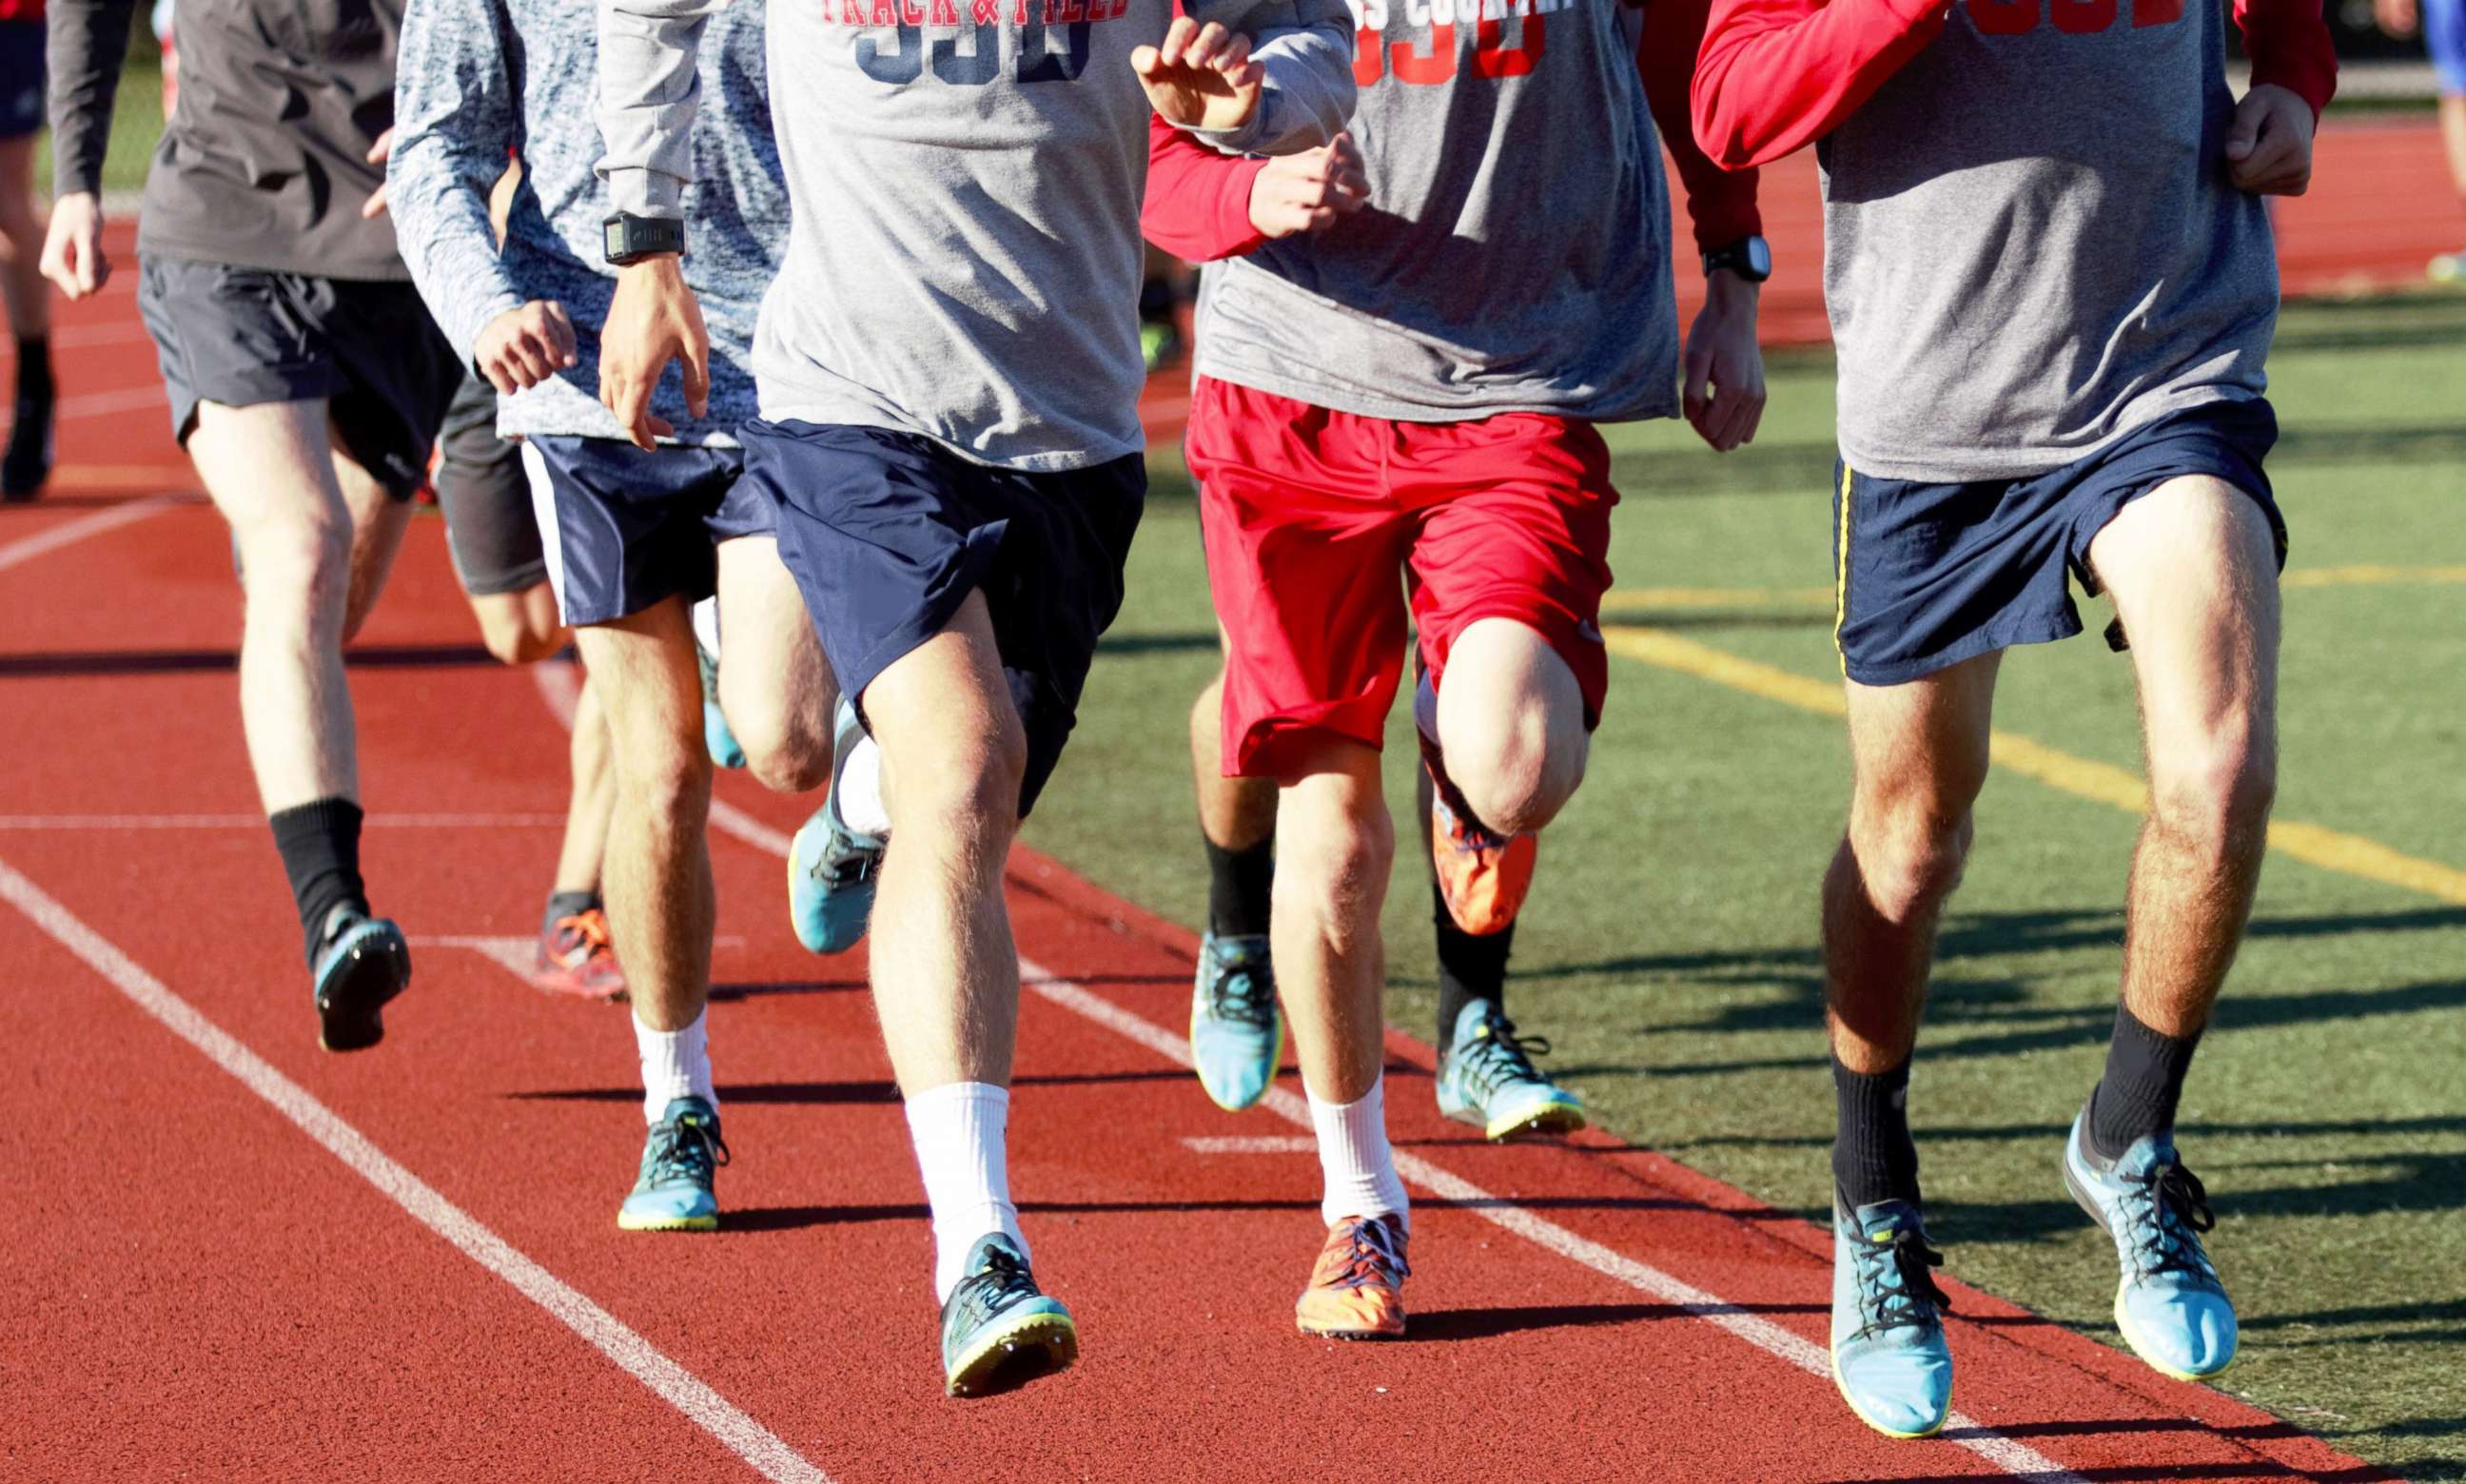 PHOTO: Students are seen running in this undated stock image.